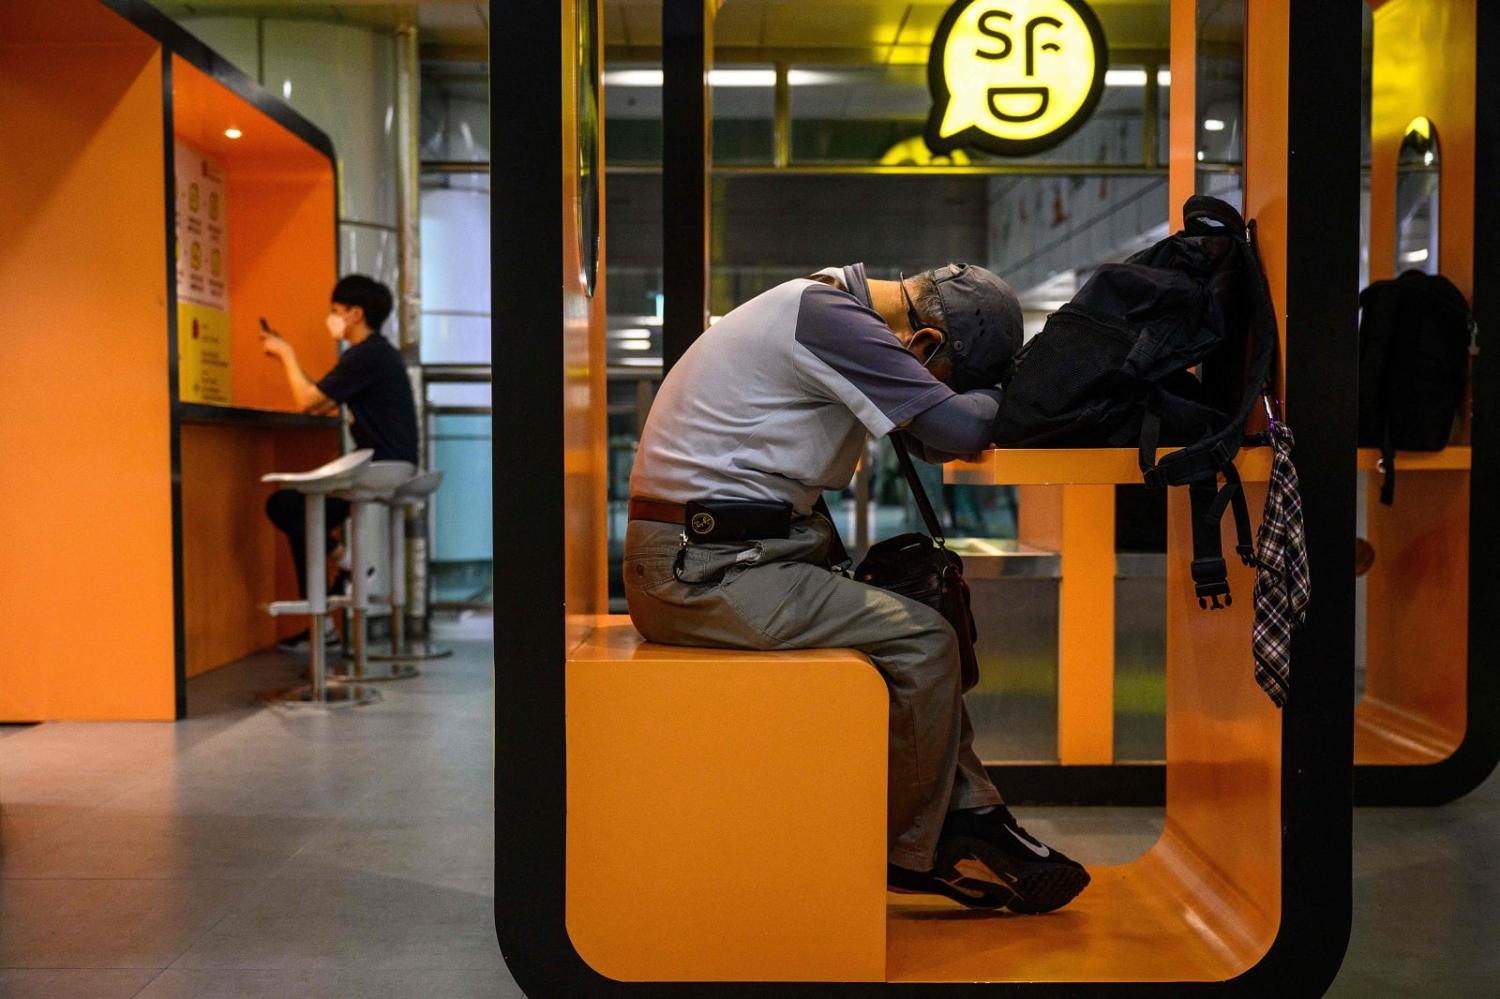 It is expected to take generations for many South Koreans to reach mean income status. A man naps in a cubicle at an underground train station in Seoul (Anthony Wallace/AFP via Getty Images)